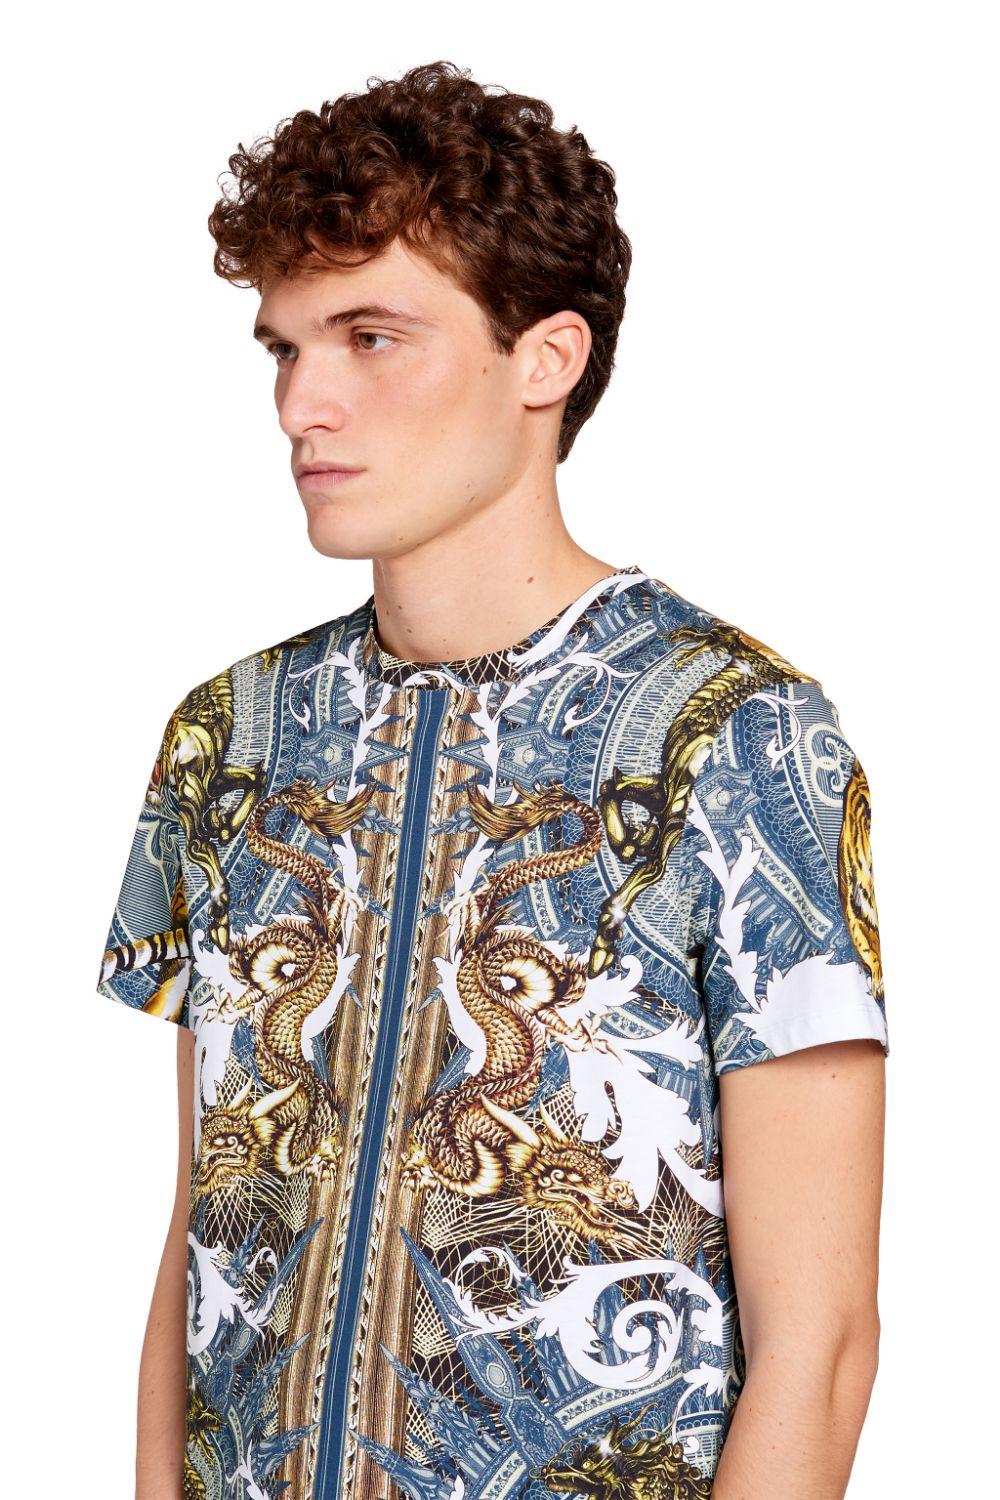 Roberto Cavalli Cotton Printed T-shirt in Blue for Men - Lyst